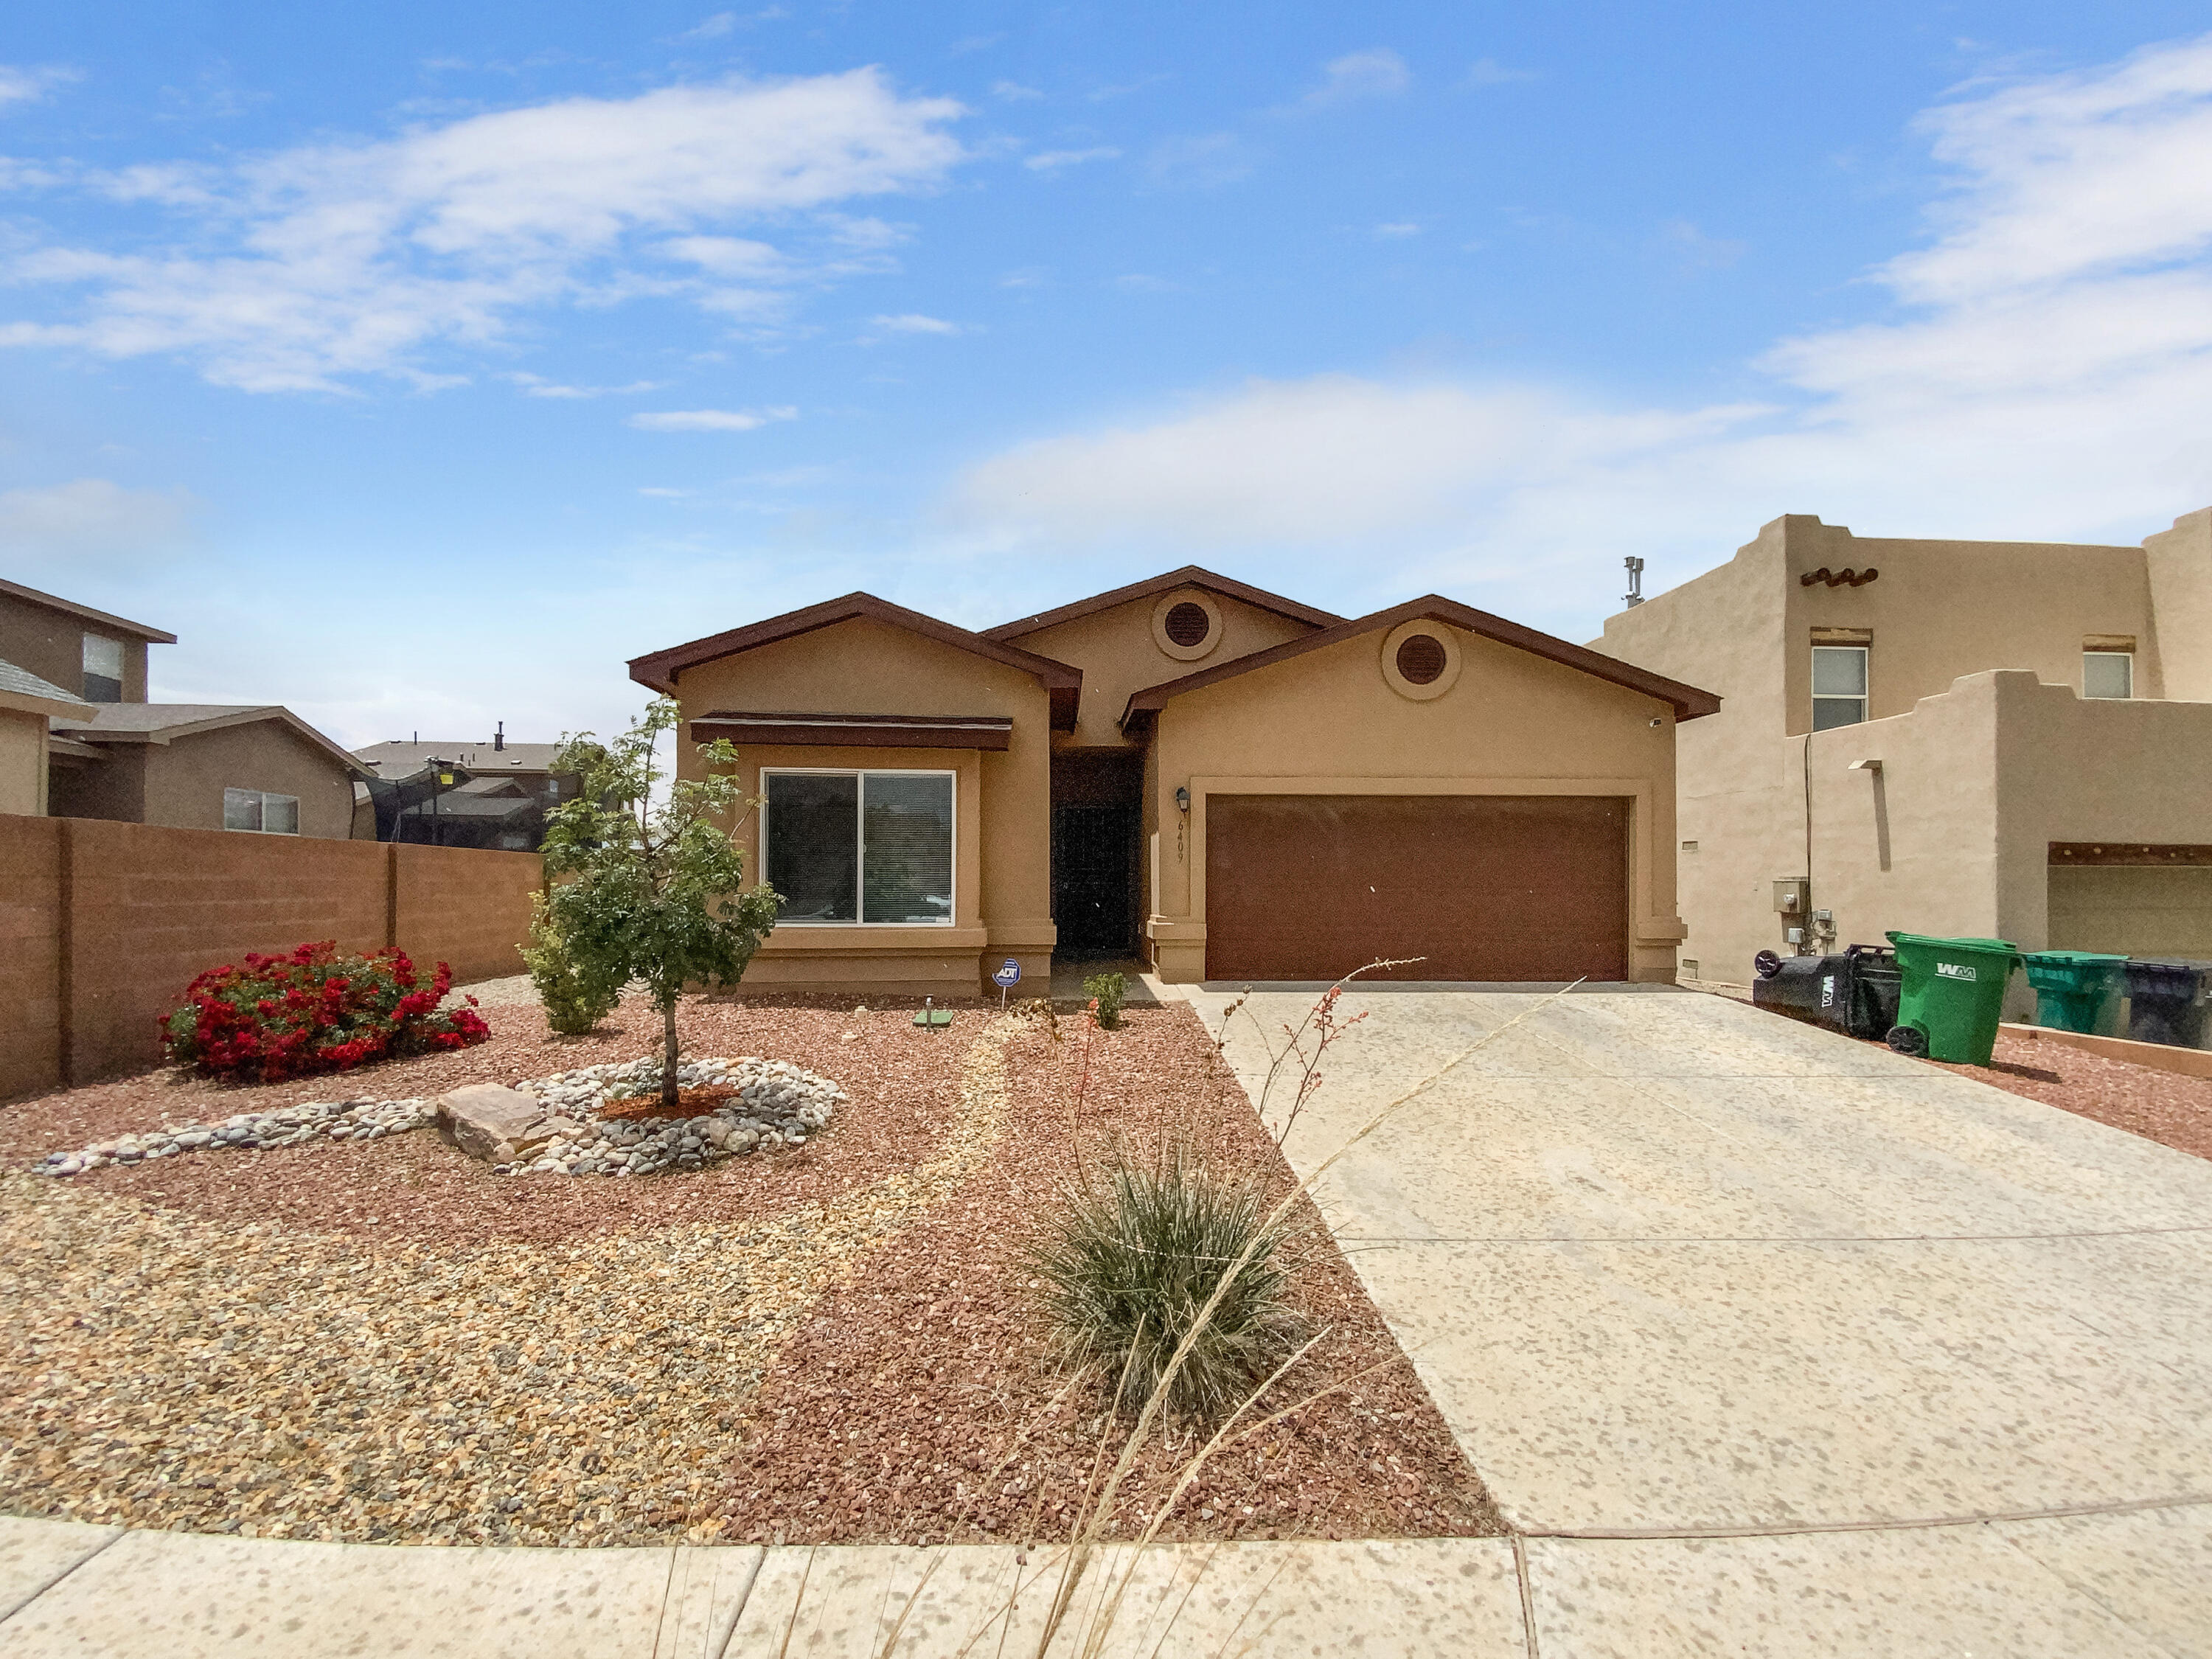 Built in 2014, this Rio Rancho one-story home offers a two-car garage.